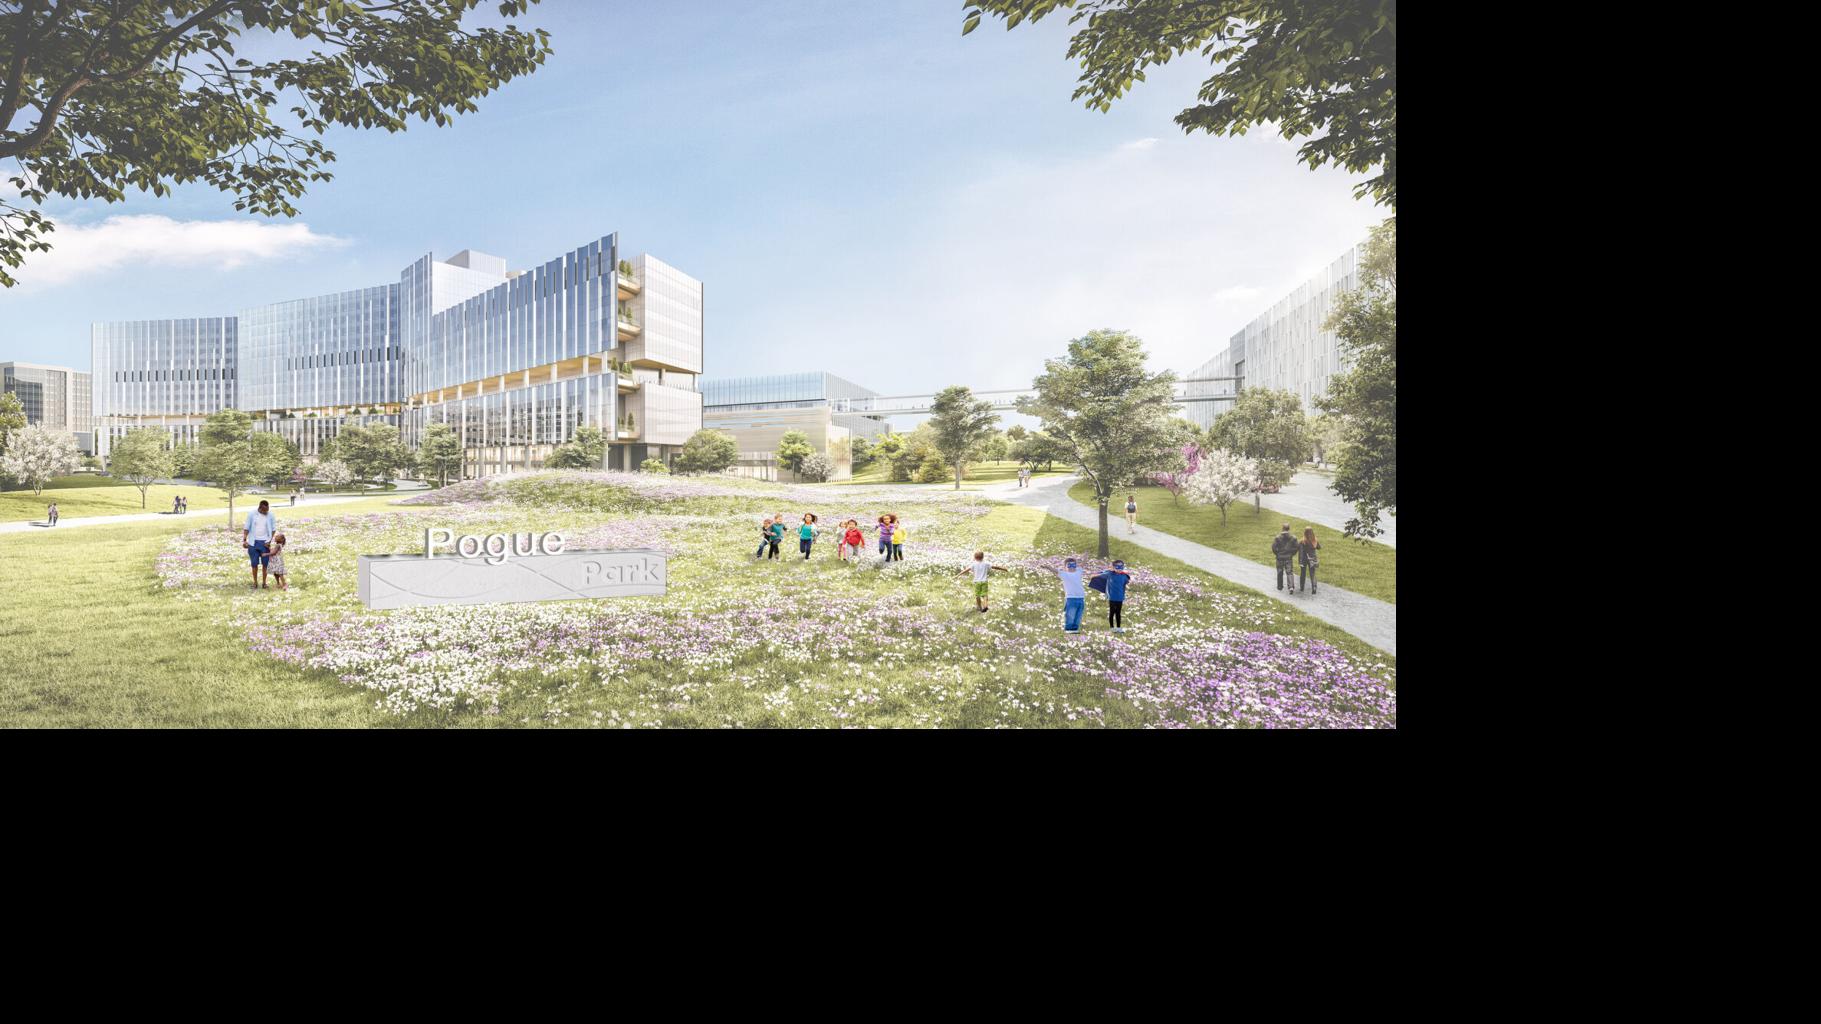 Children's Health and UT Southwestern Receive $100 Million Donation from the Pogue Family for New $5 Billion Dallas Pediatric Campus